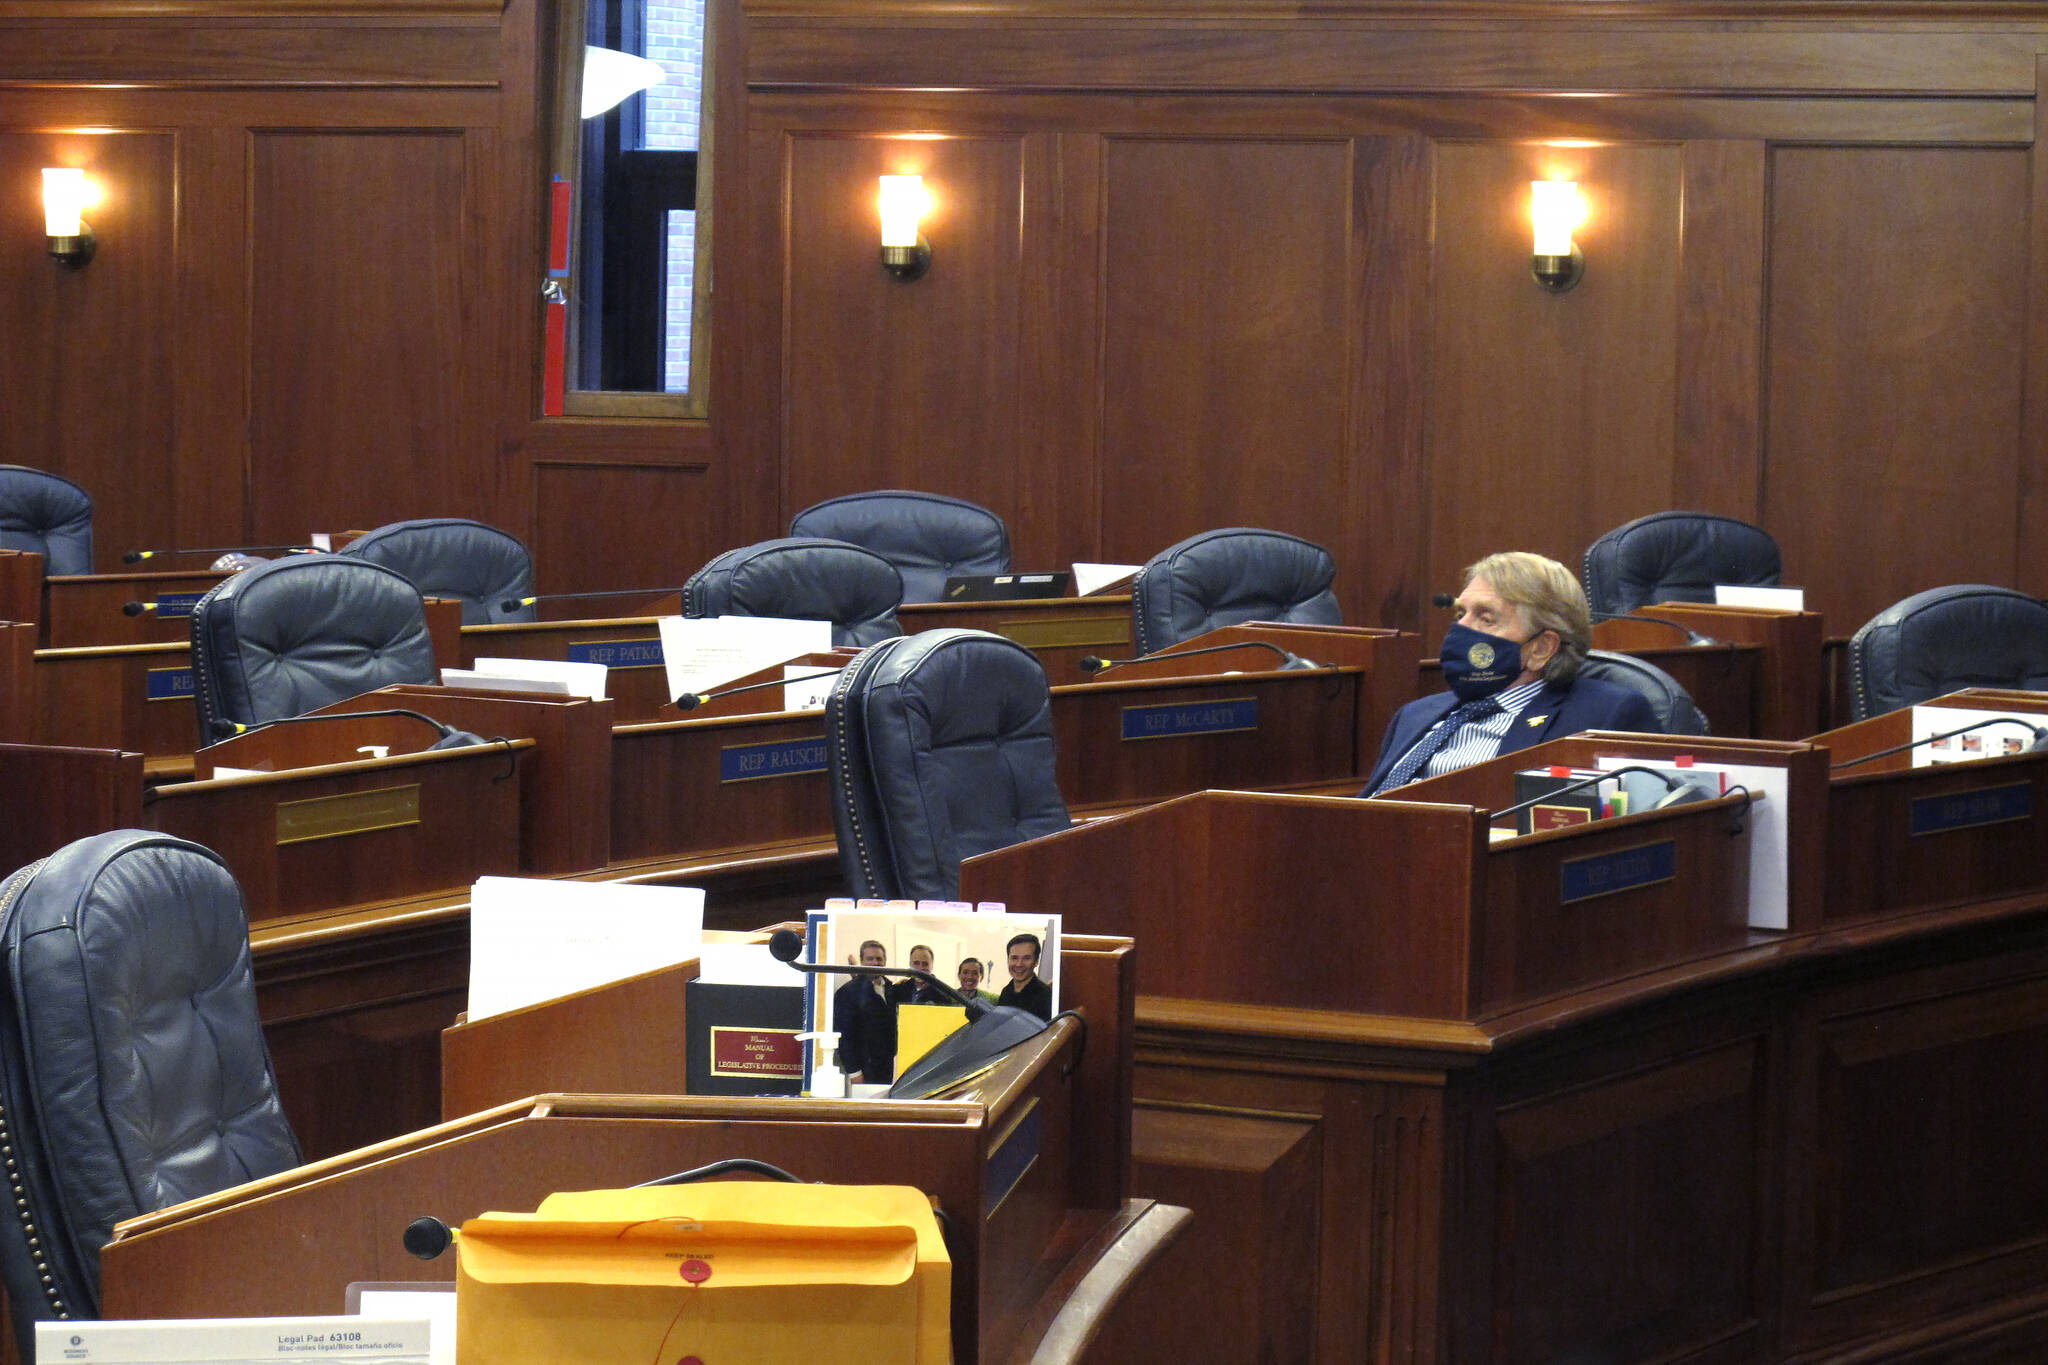 Alaska state Rep. Laddie Shaw, an Anchorage Republican, waits for the start of a so-called technical session on the House floor, Wednesday, Oct. 20, 2021, in Juneau, Alaska. The fourth special legislative session of the year began Oct. 4, in Juneau, but there has been little action at the Capitol and little progress toward resolving Alaska’s fiscal issues. (AP Photo/Becky Bohrer)